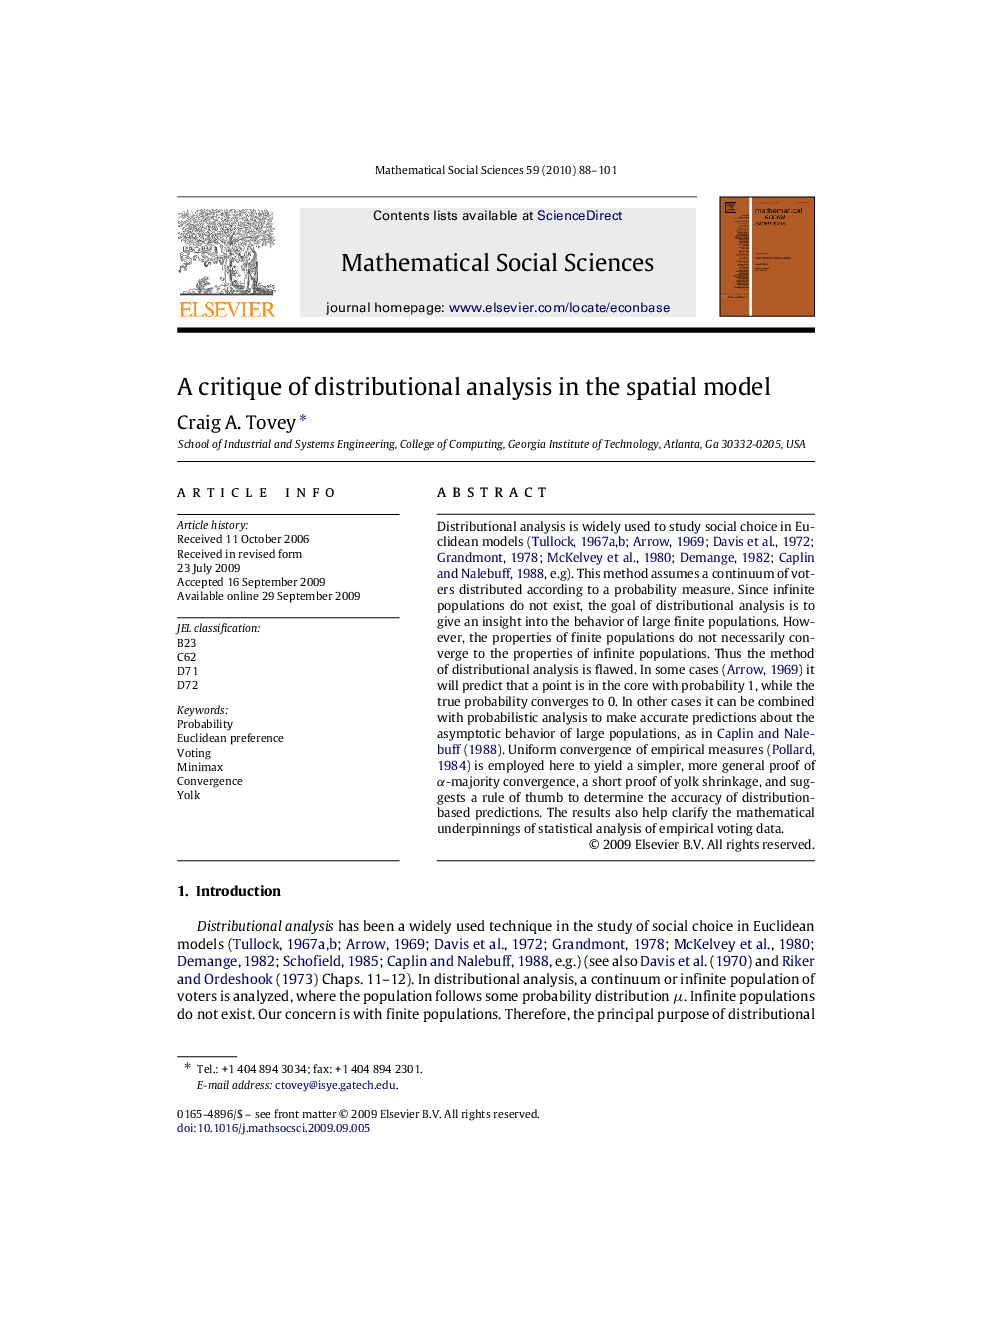 A critique of distributional analysis in the spatial model